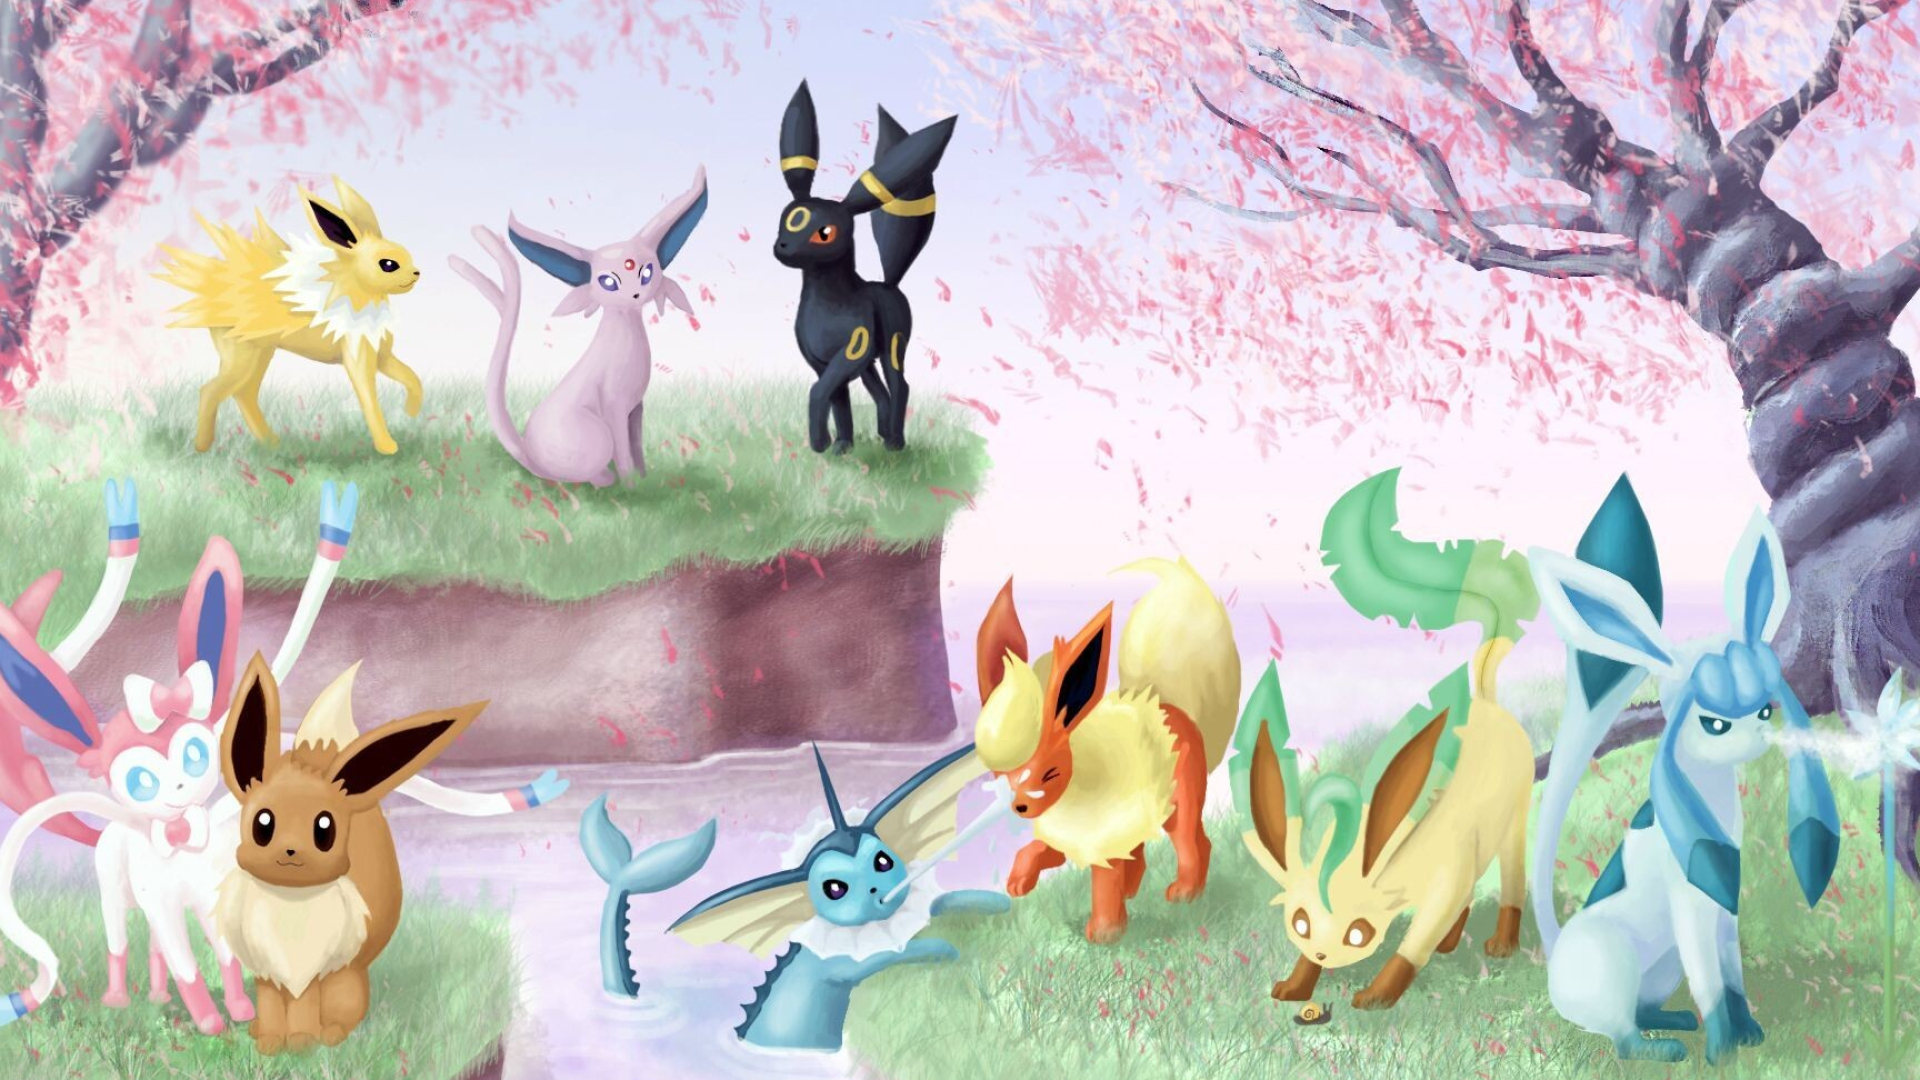 Glaceon: A series setting on a family of Eeveelutions, Pokemon family, Eevee. 1920x1080 Full HD Wallpaper.